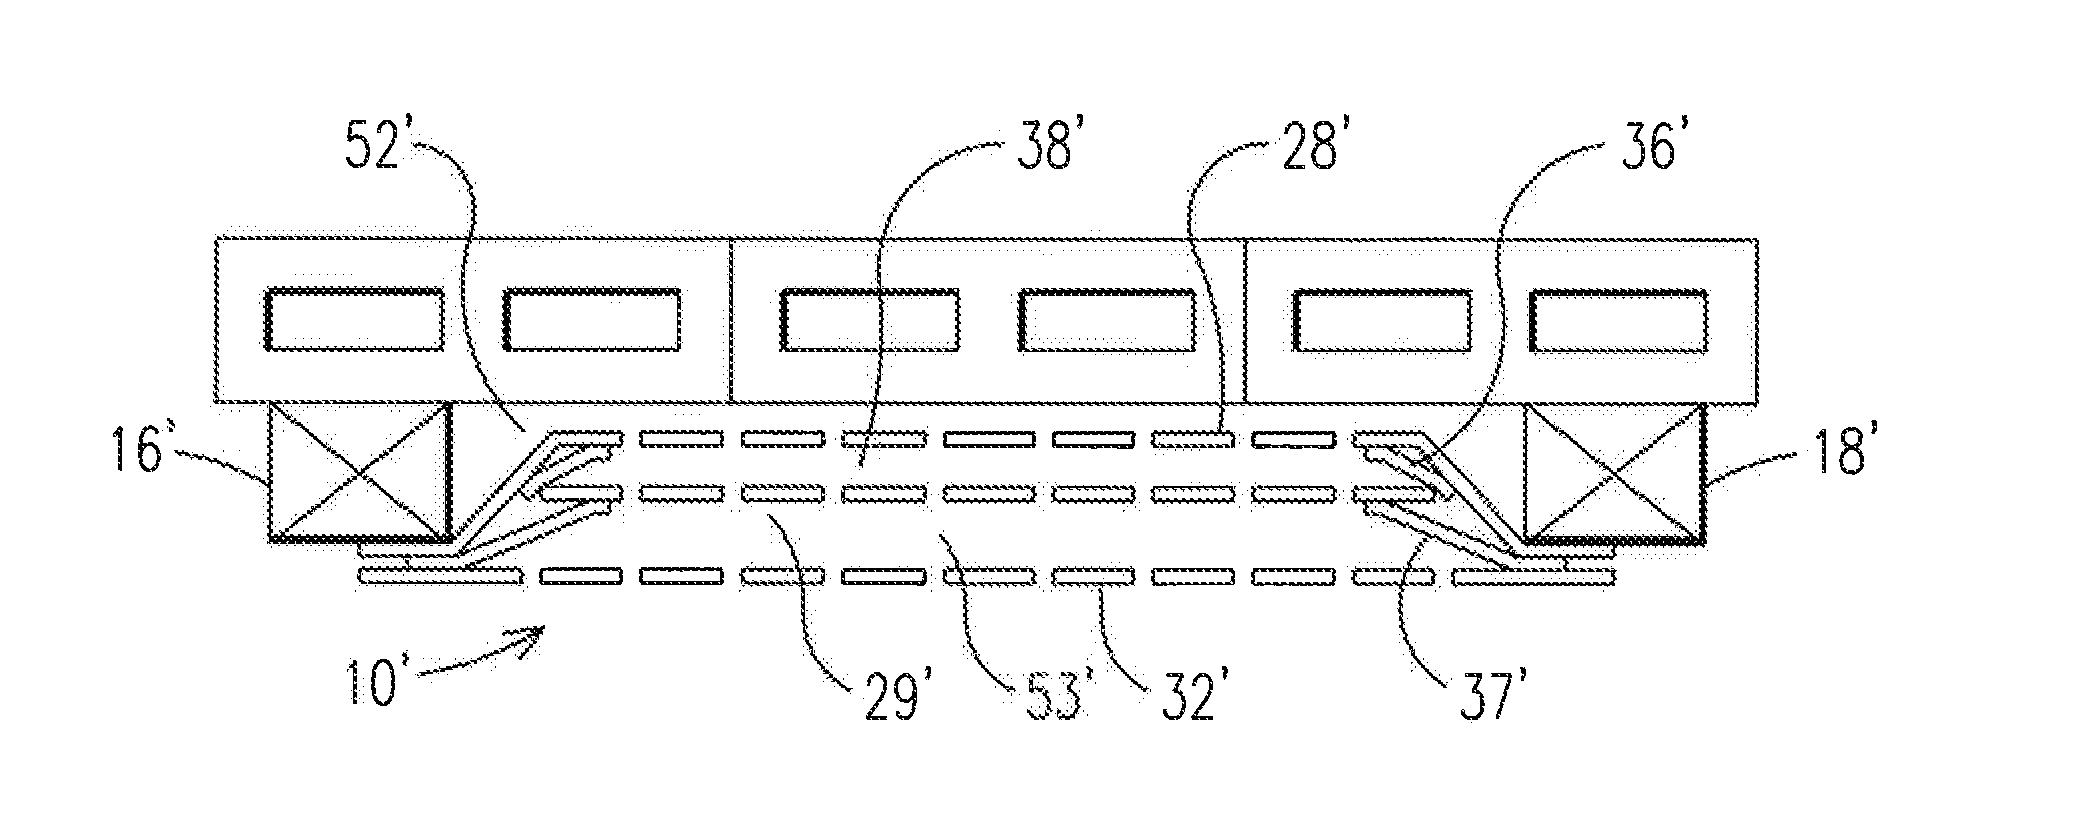 System and method for providing a reflective insulation layer